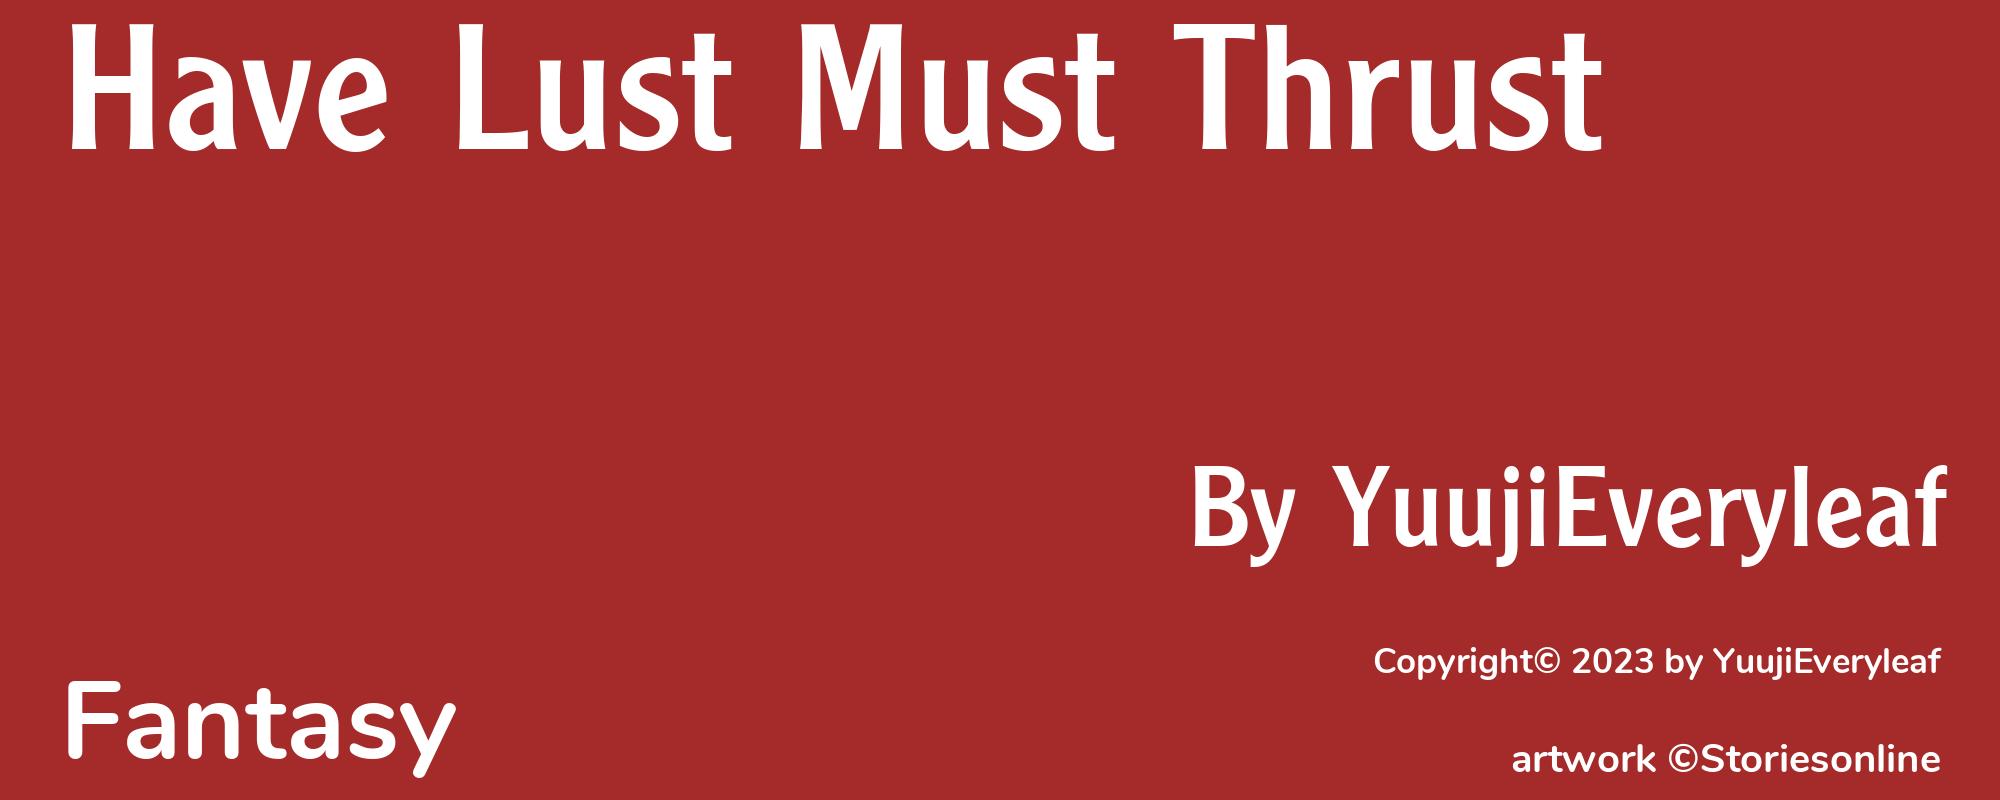 Have Lust Must Thrust - Cover